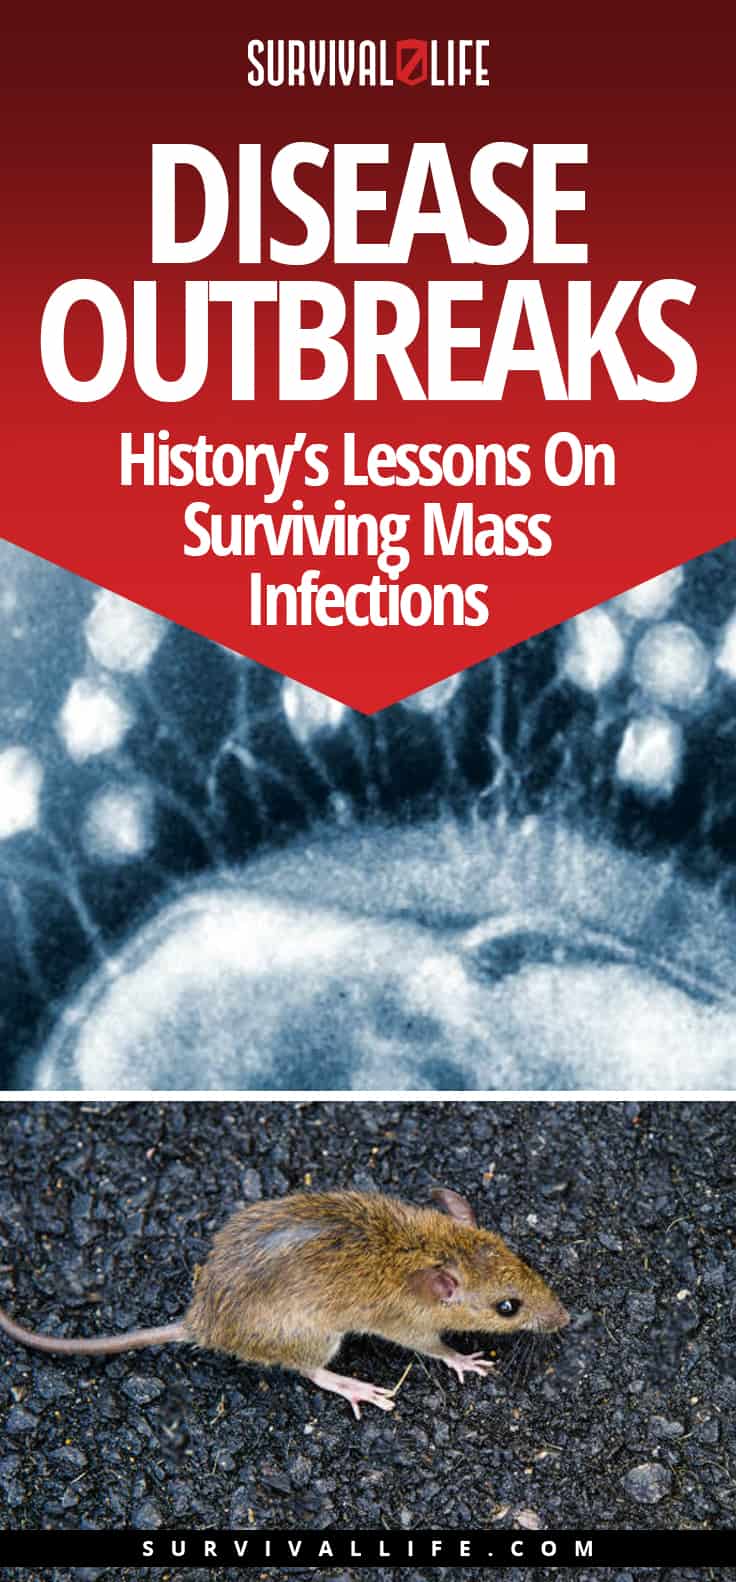 Disease Outbreaks: History’s Lessons On Surviving Mass Infections